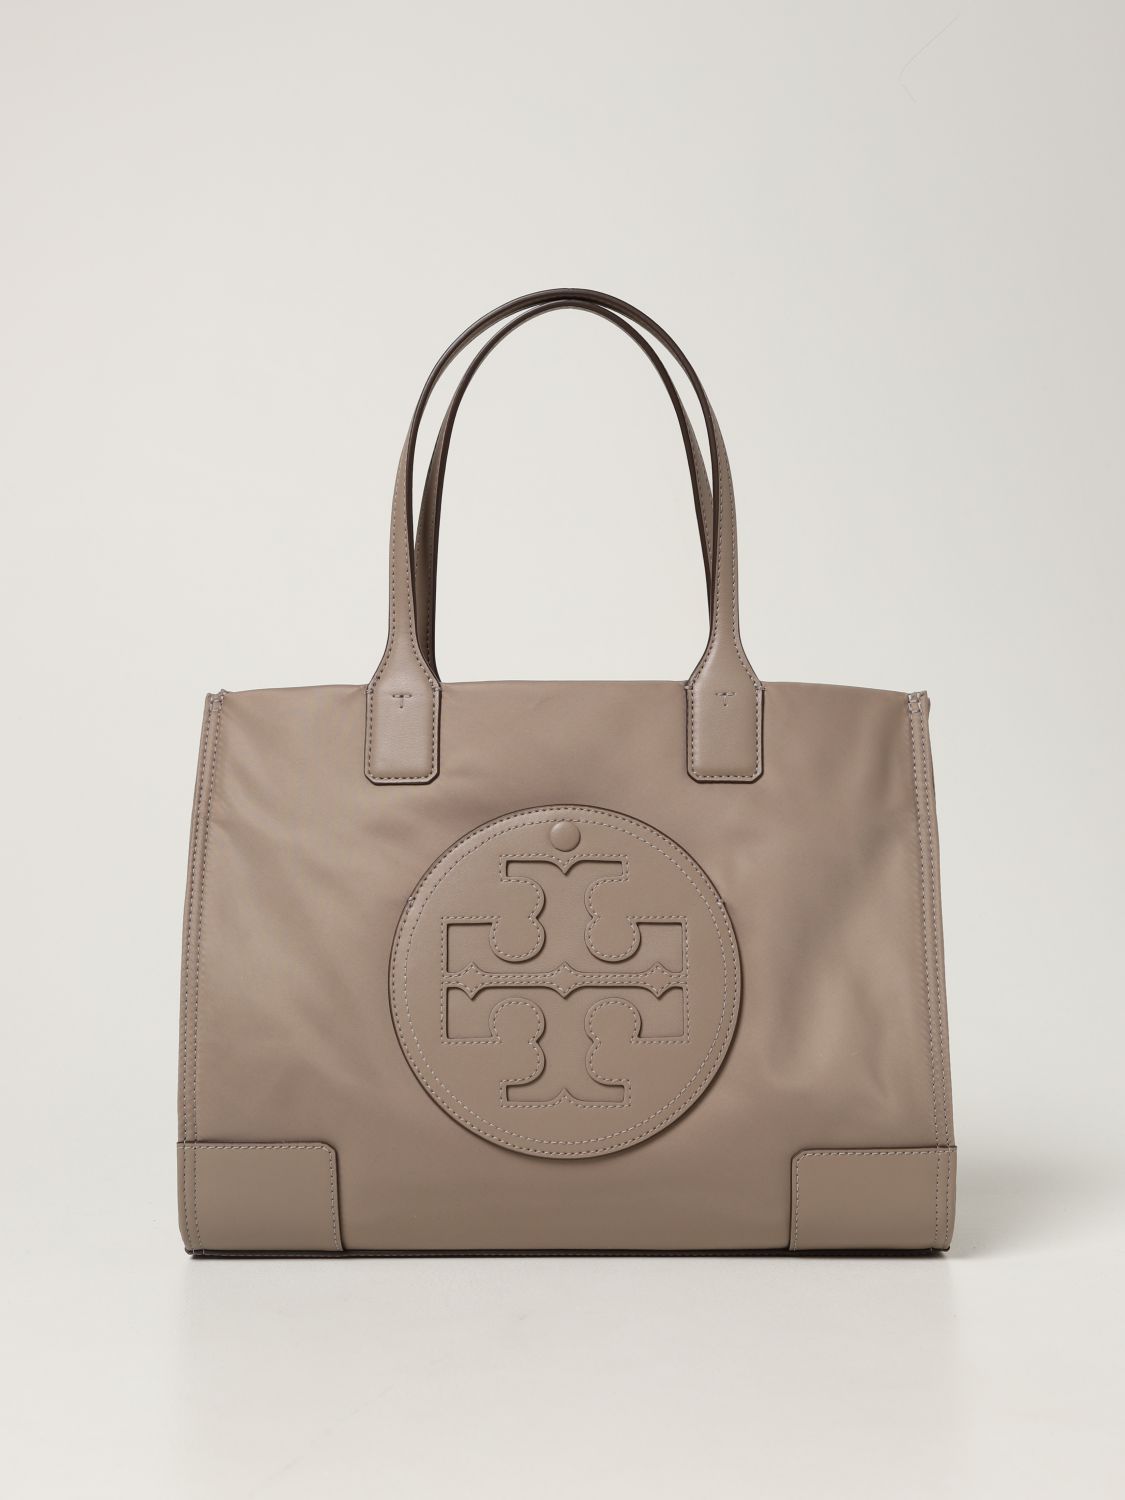 TORY BURCH: Ella Tote nylon bag with emblem - Beige | Tory Burch tote bags  88578 online on 